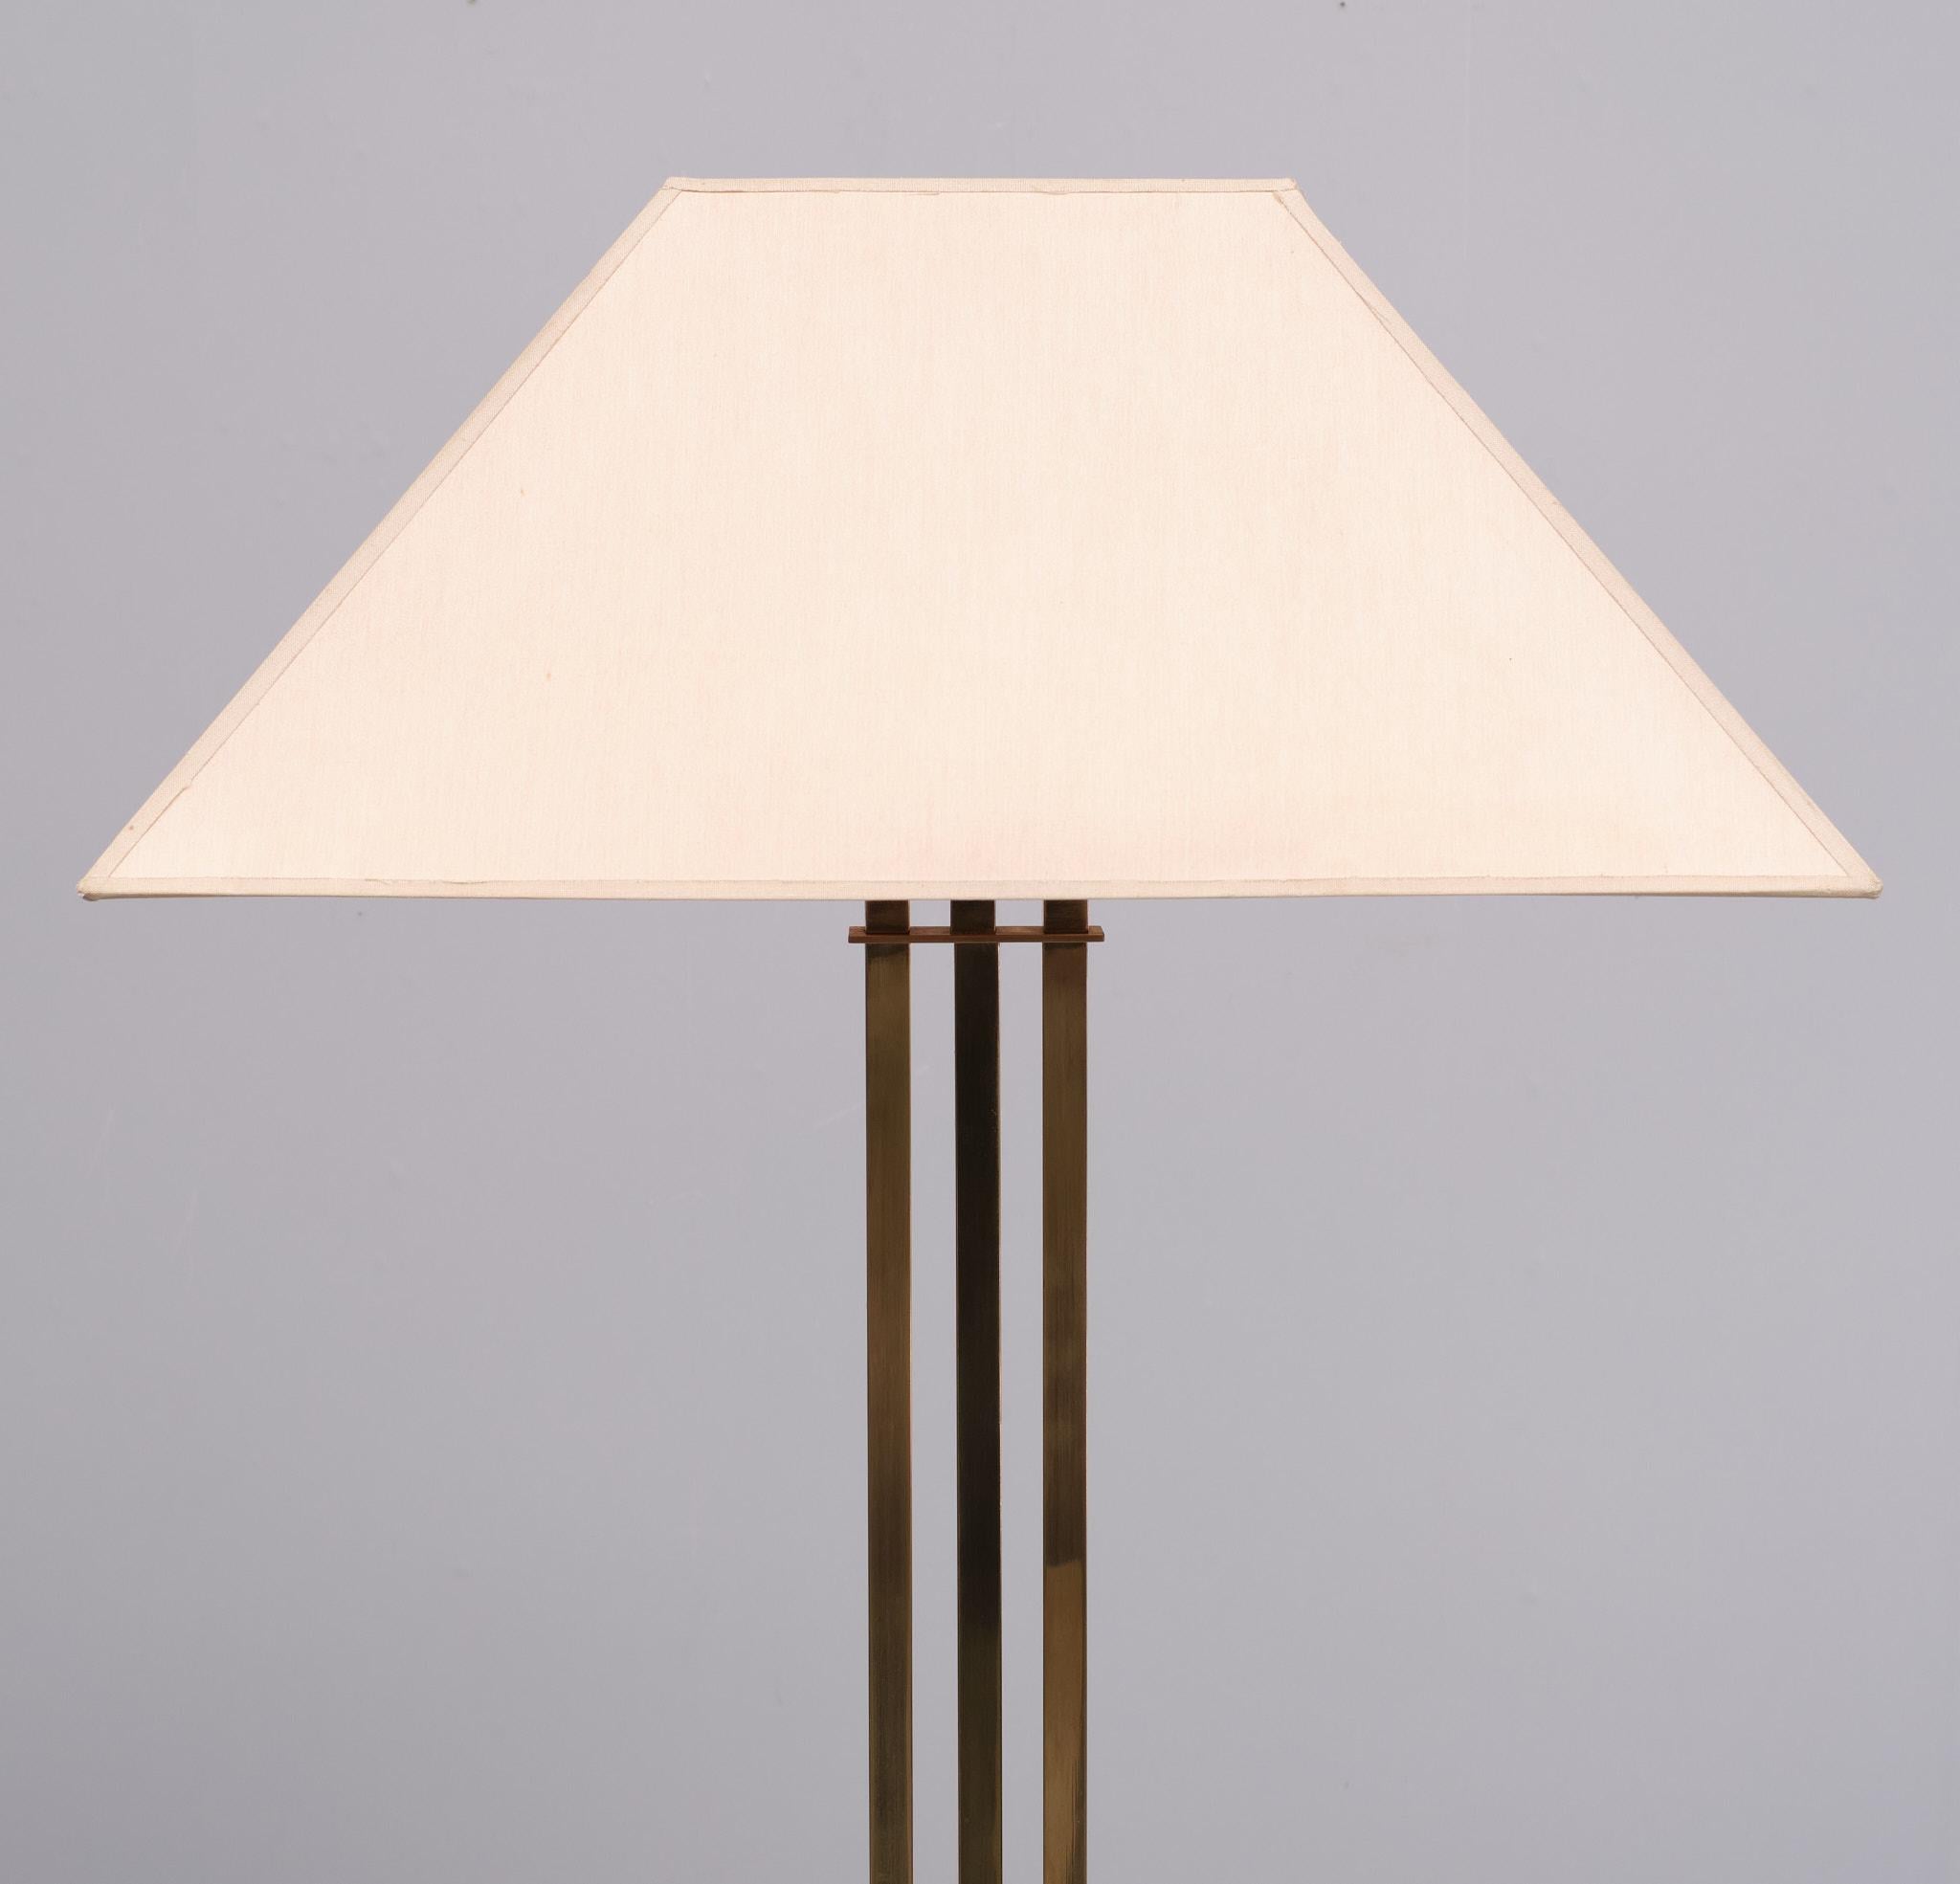 Very nice Brass Deknudt floor lamp . Design by Willy Rizzo  Three Brass Square uprights on a rectangular base  . comes with its original shade. One large E27 bulb needed 
with foot switch , I also have the table lamp ,with the same design and shade